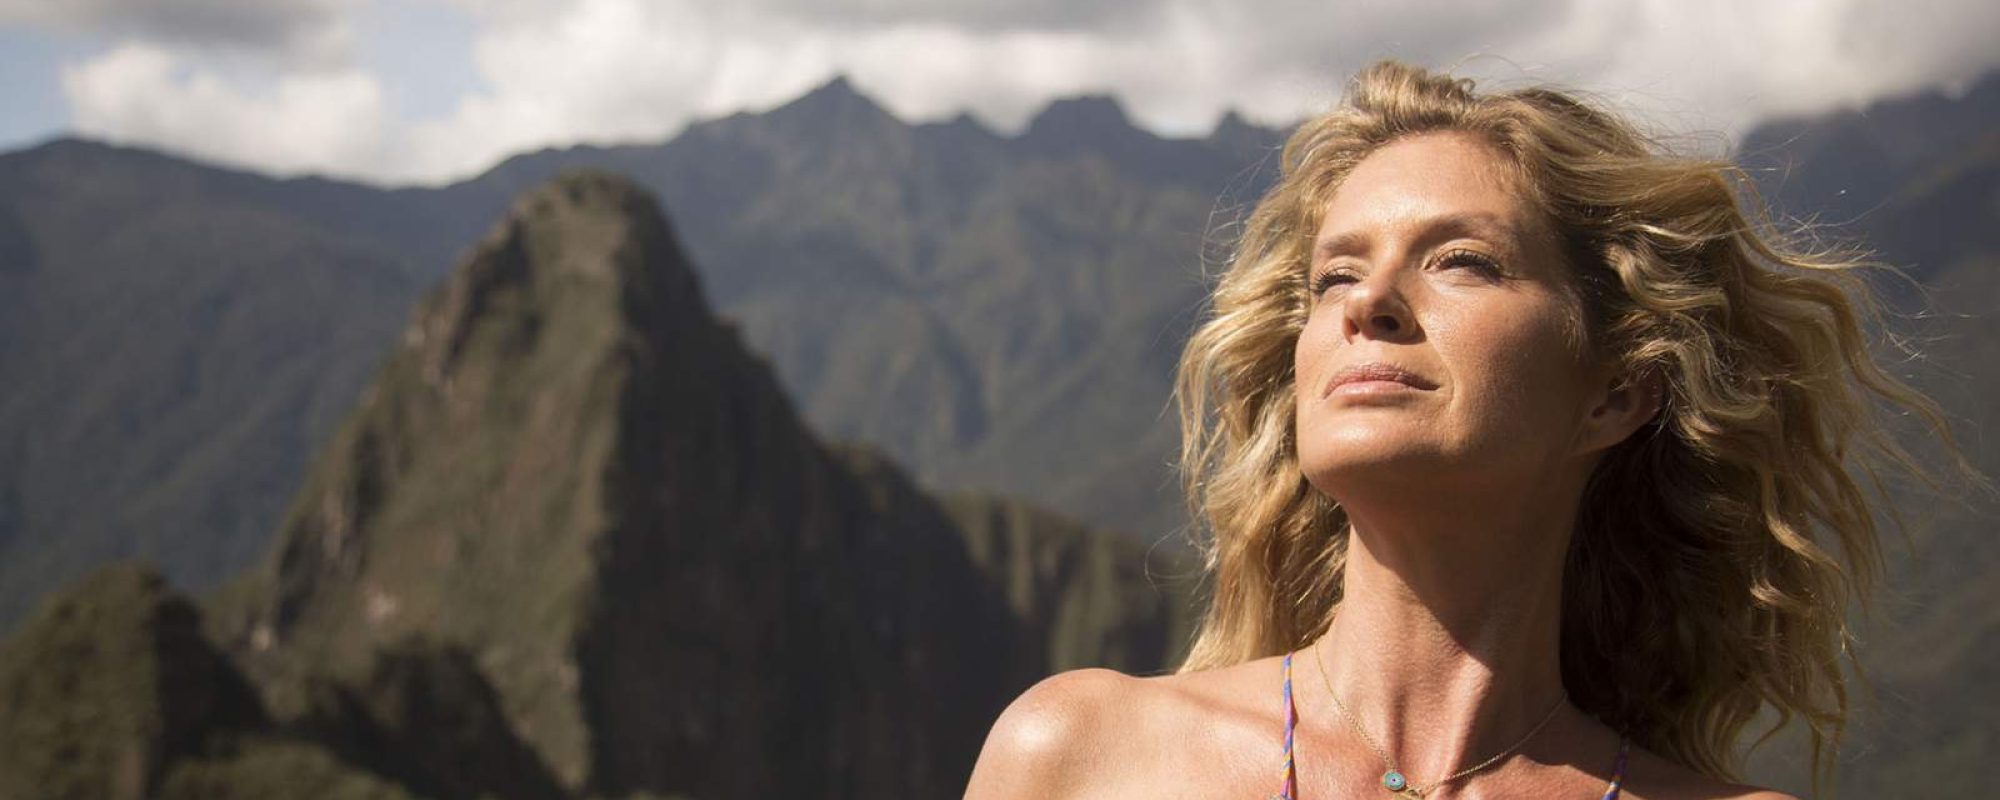 OVATION ACQUIRES U.S. BROADCAST AND DIGITAL RIGHTS TO SEASON TWO OF RACHEL HUNTER’S TOUR OF BEAUTY